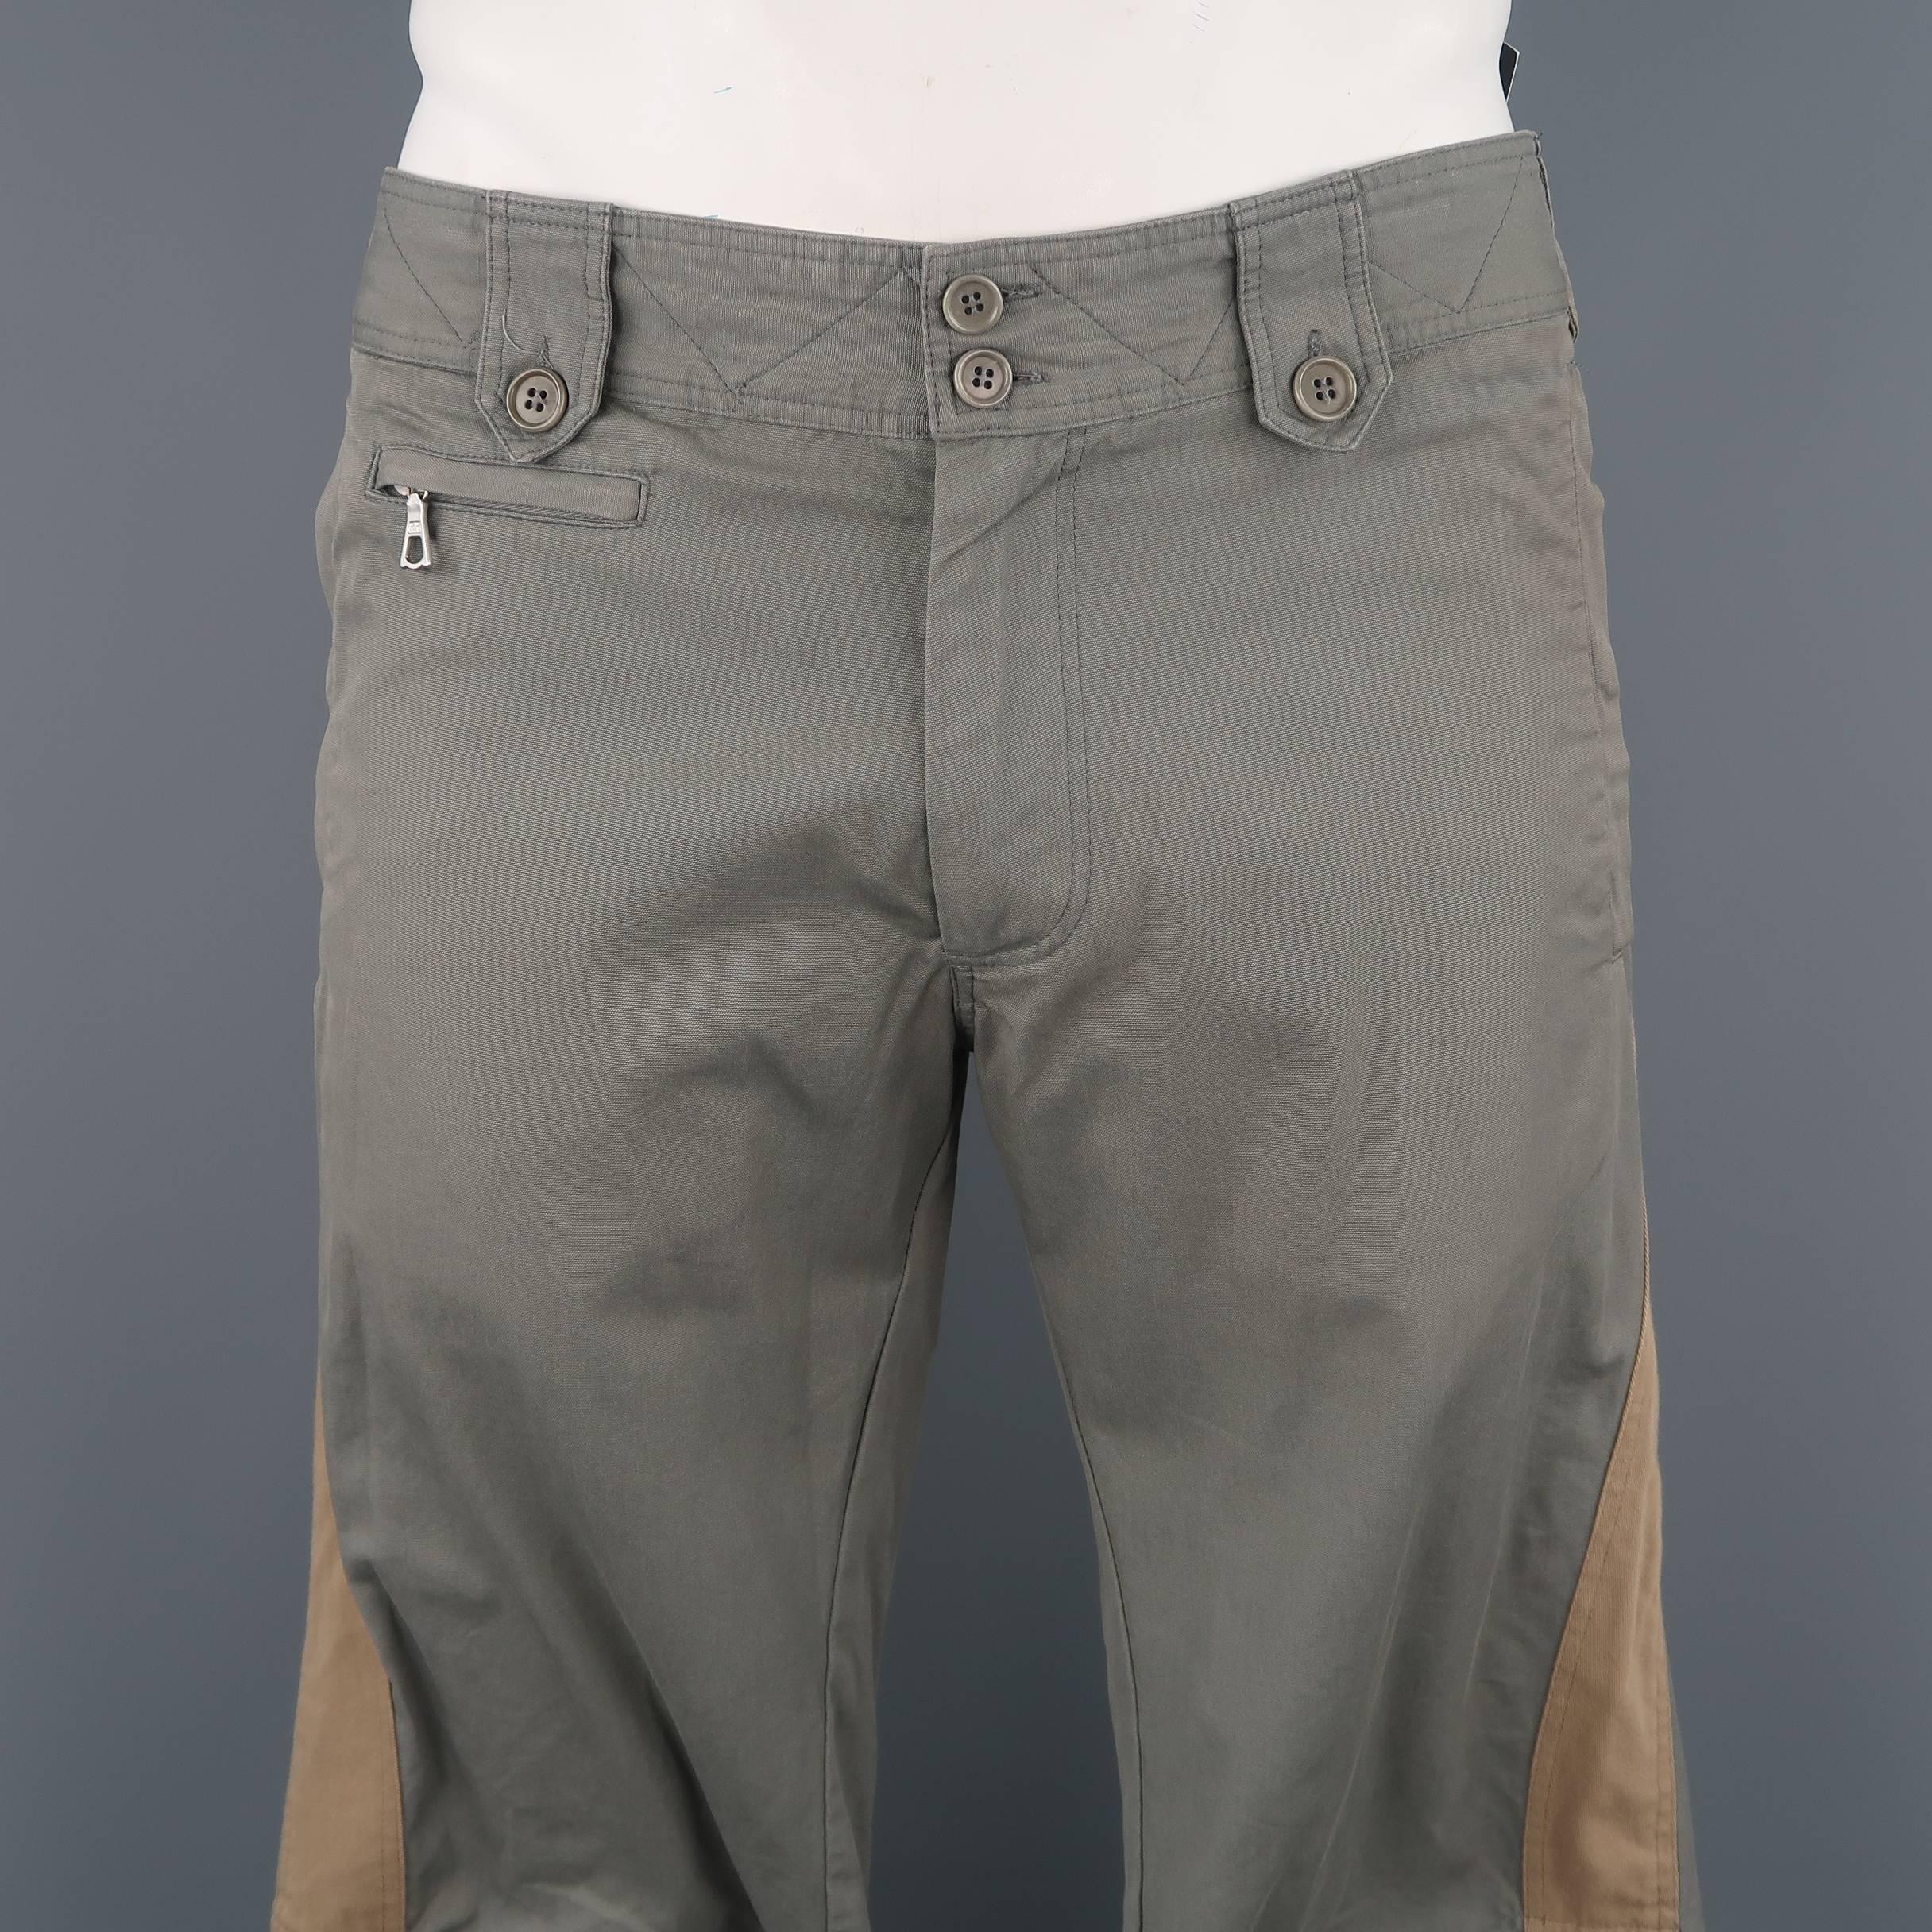 Dries Van Noten motorcycle pants comes in light neutral gray cotton canvas with snap and zip pockets tan stripe panels, darted knees, and zip cuffs. Made in Romania.
 
Excellent Pre-Owned Condition.
Marked: IT 50
 
Measurements:
 
Waist: 34